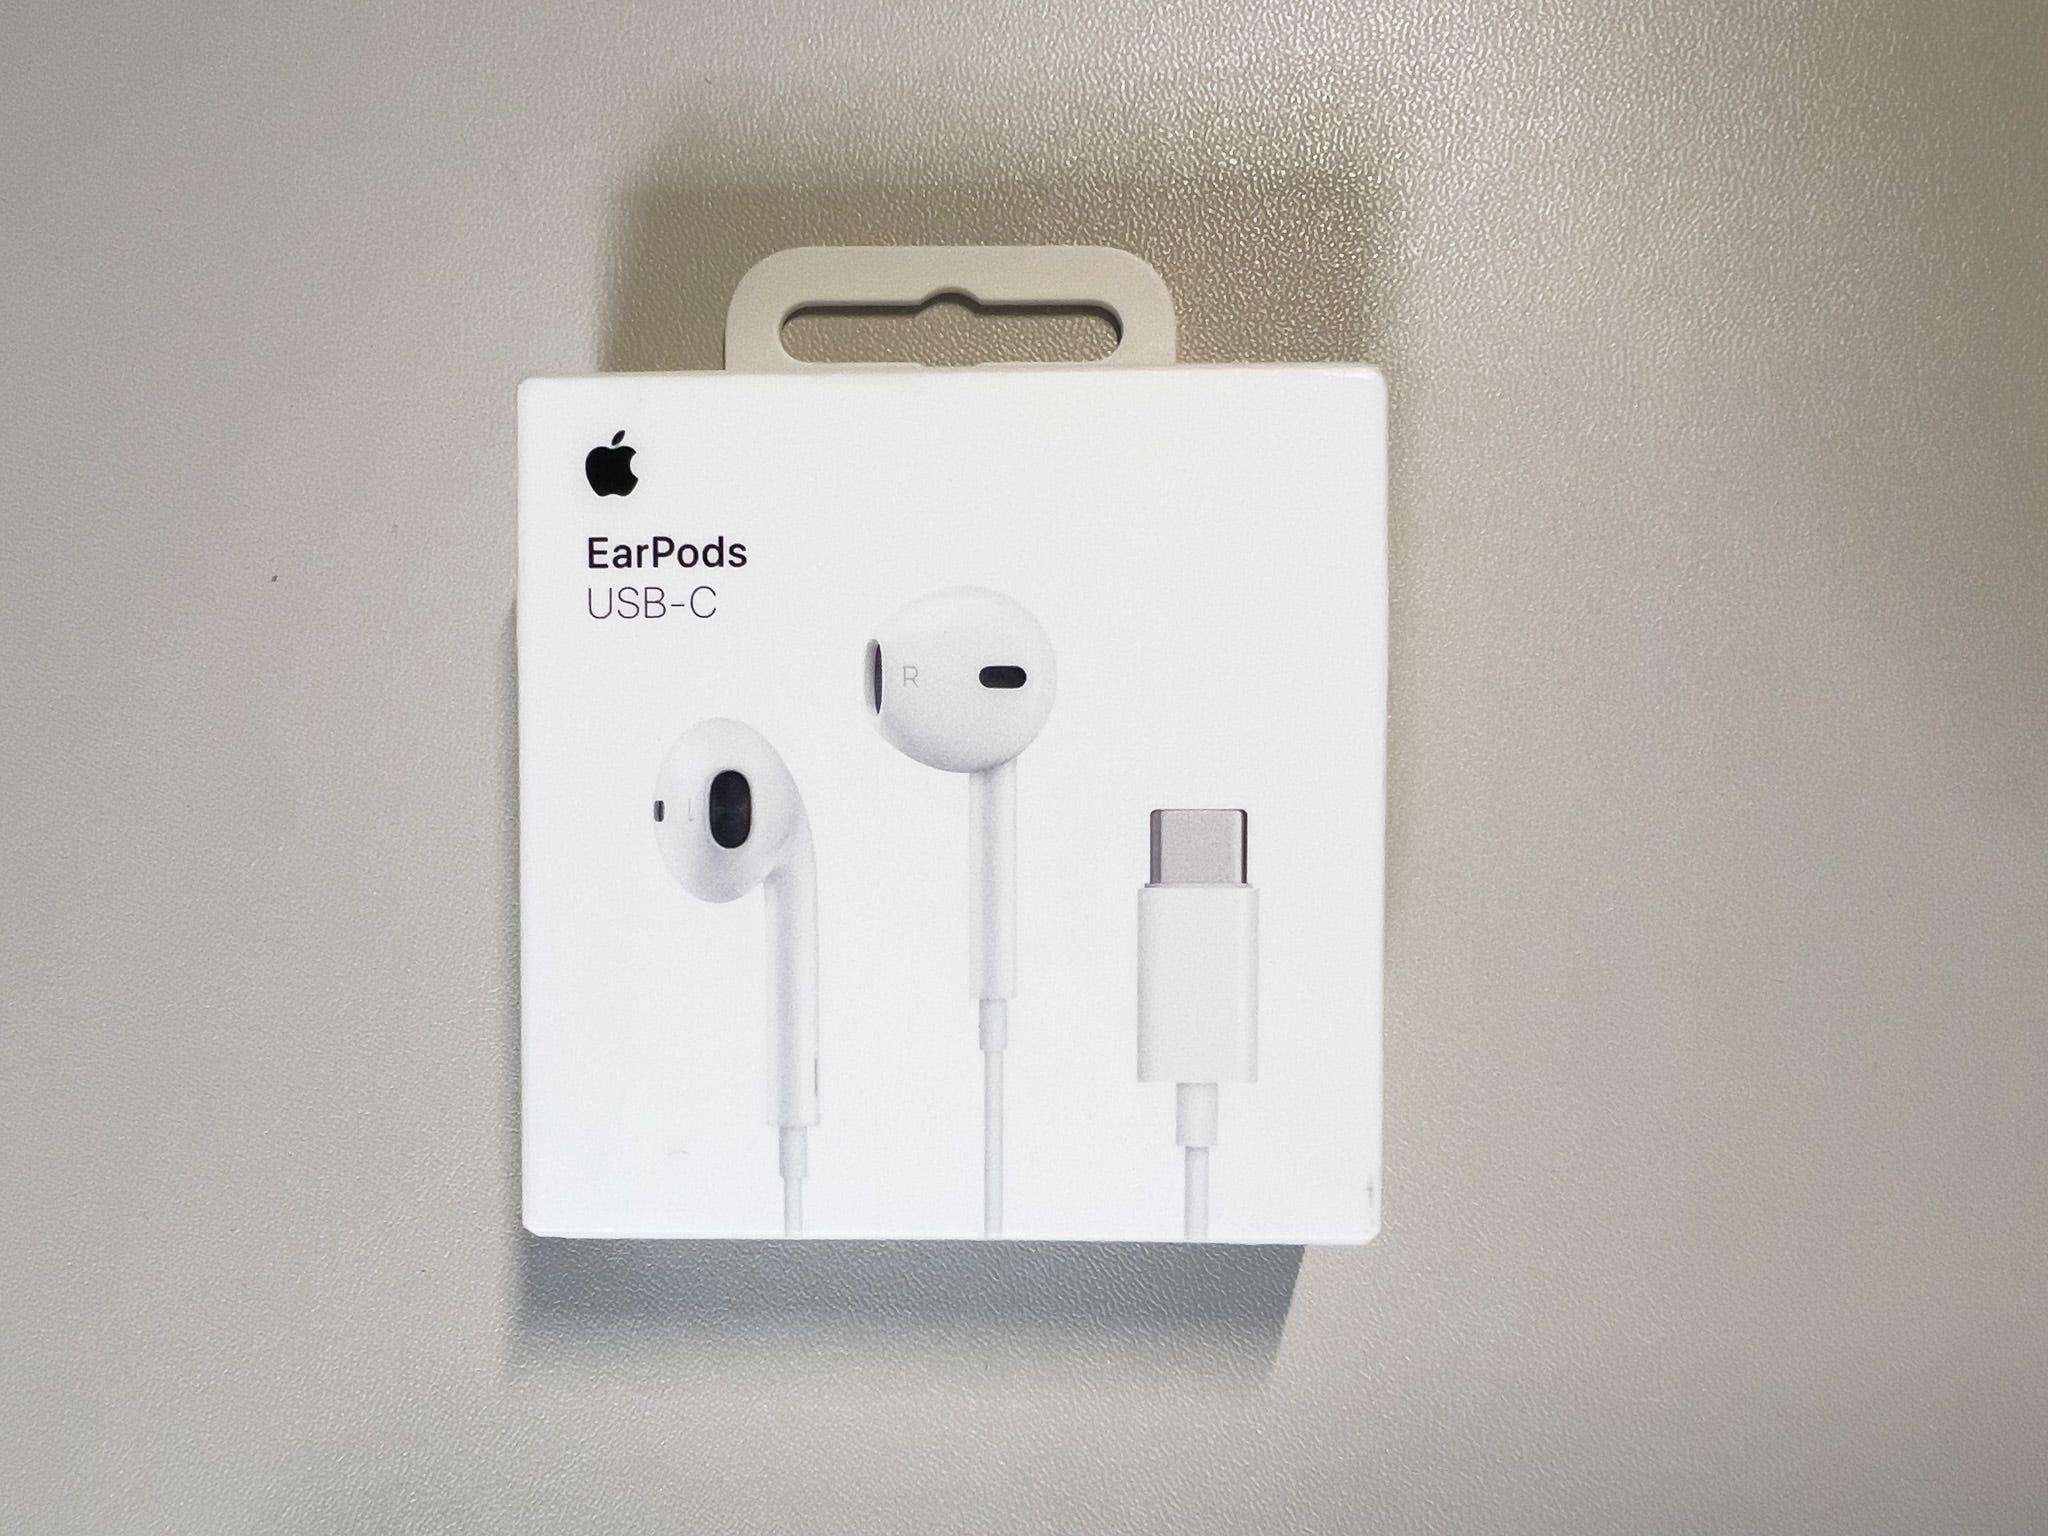 How did Apple build a solid pair of headphones for only $19?